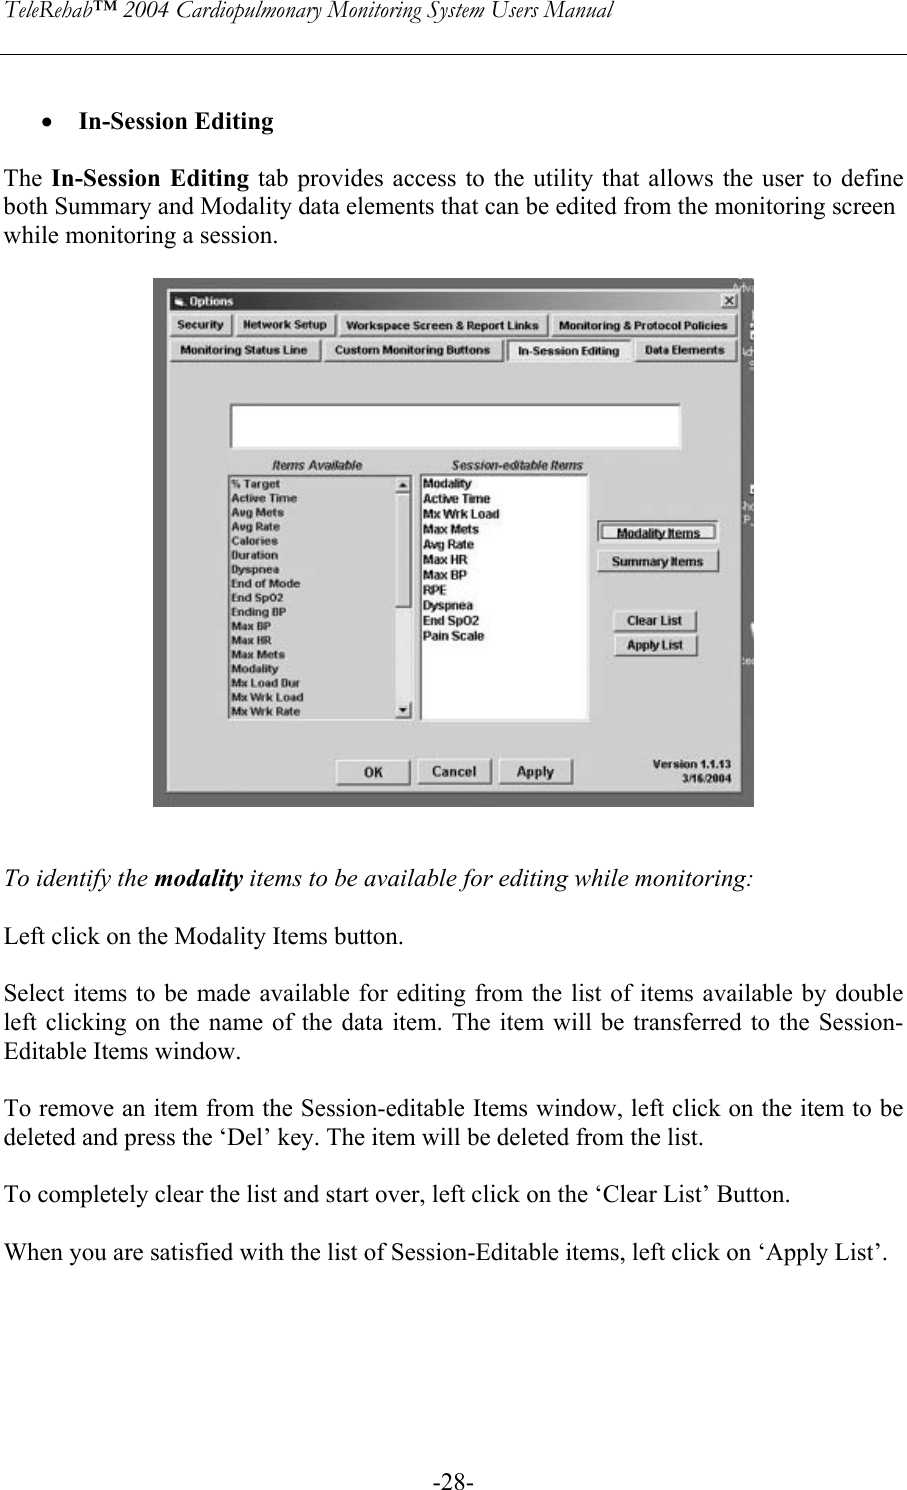 TeleRehab™ 2004 Cardiopulmonary Monitoring System Users Manual    -28- • In-Session Editing  The In-Session Editing tab provides access to the utility that allows the user to define both Summary and Modality data elements that can be edited from the monitoring screen  while monitoring a session.     To identify the modality items to be available for editing while monitoring:  Left click on the Modality Items button.  Select items to be made available for editing from the list of items available by double left clicking on the name of the data item. The item will be transferred to the Session-Editable Items window.  To remove an item from the Session-editable Items window, left click on the item to be deleted and press the ‘Del’ key. The item will be deleted from the list.  To completely clear the list and start over, left click on the ‘Clear List’ Button.  When you are satisfied with the list of Session-Editable items, left click on ‘Apply List’.      